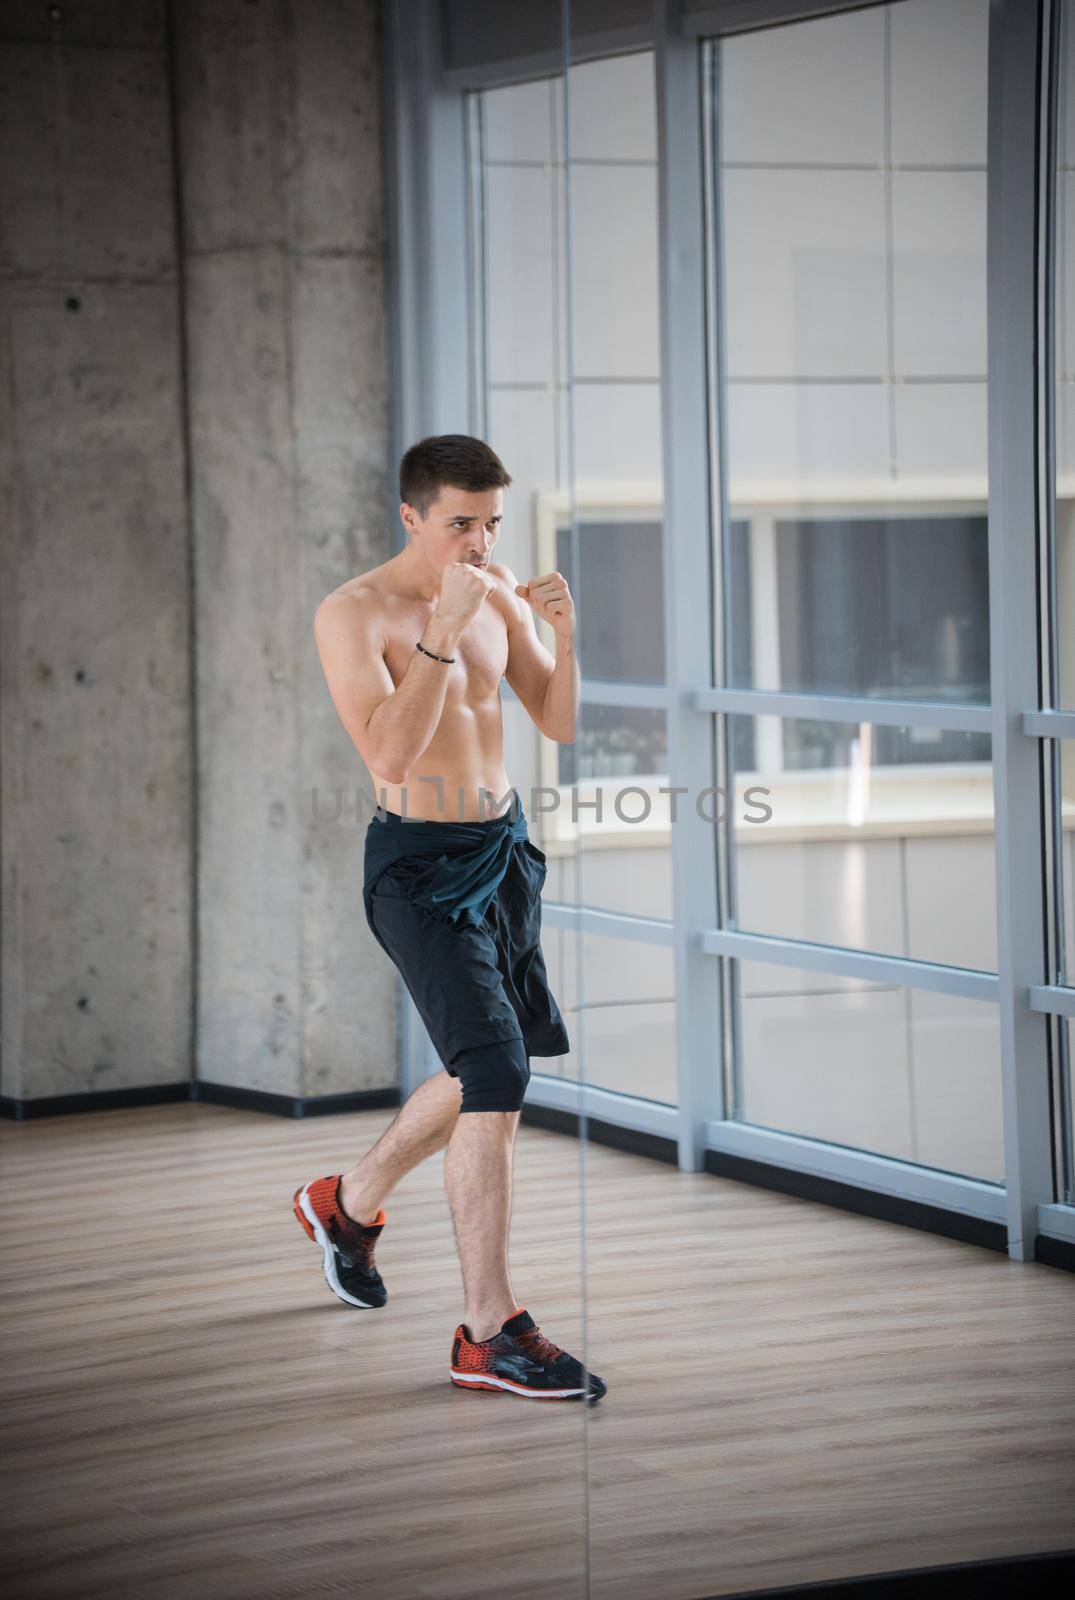 An athletic man boxer standing in fighting protection pose in the studio. Mid shot